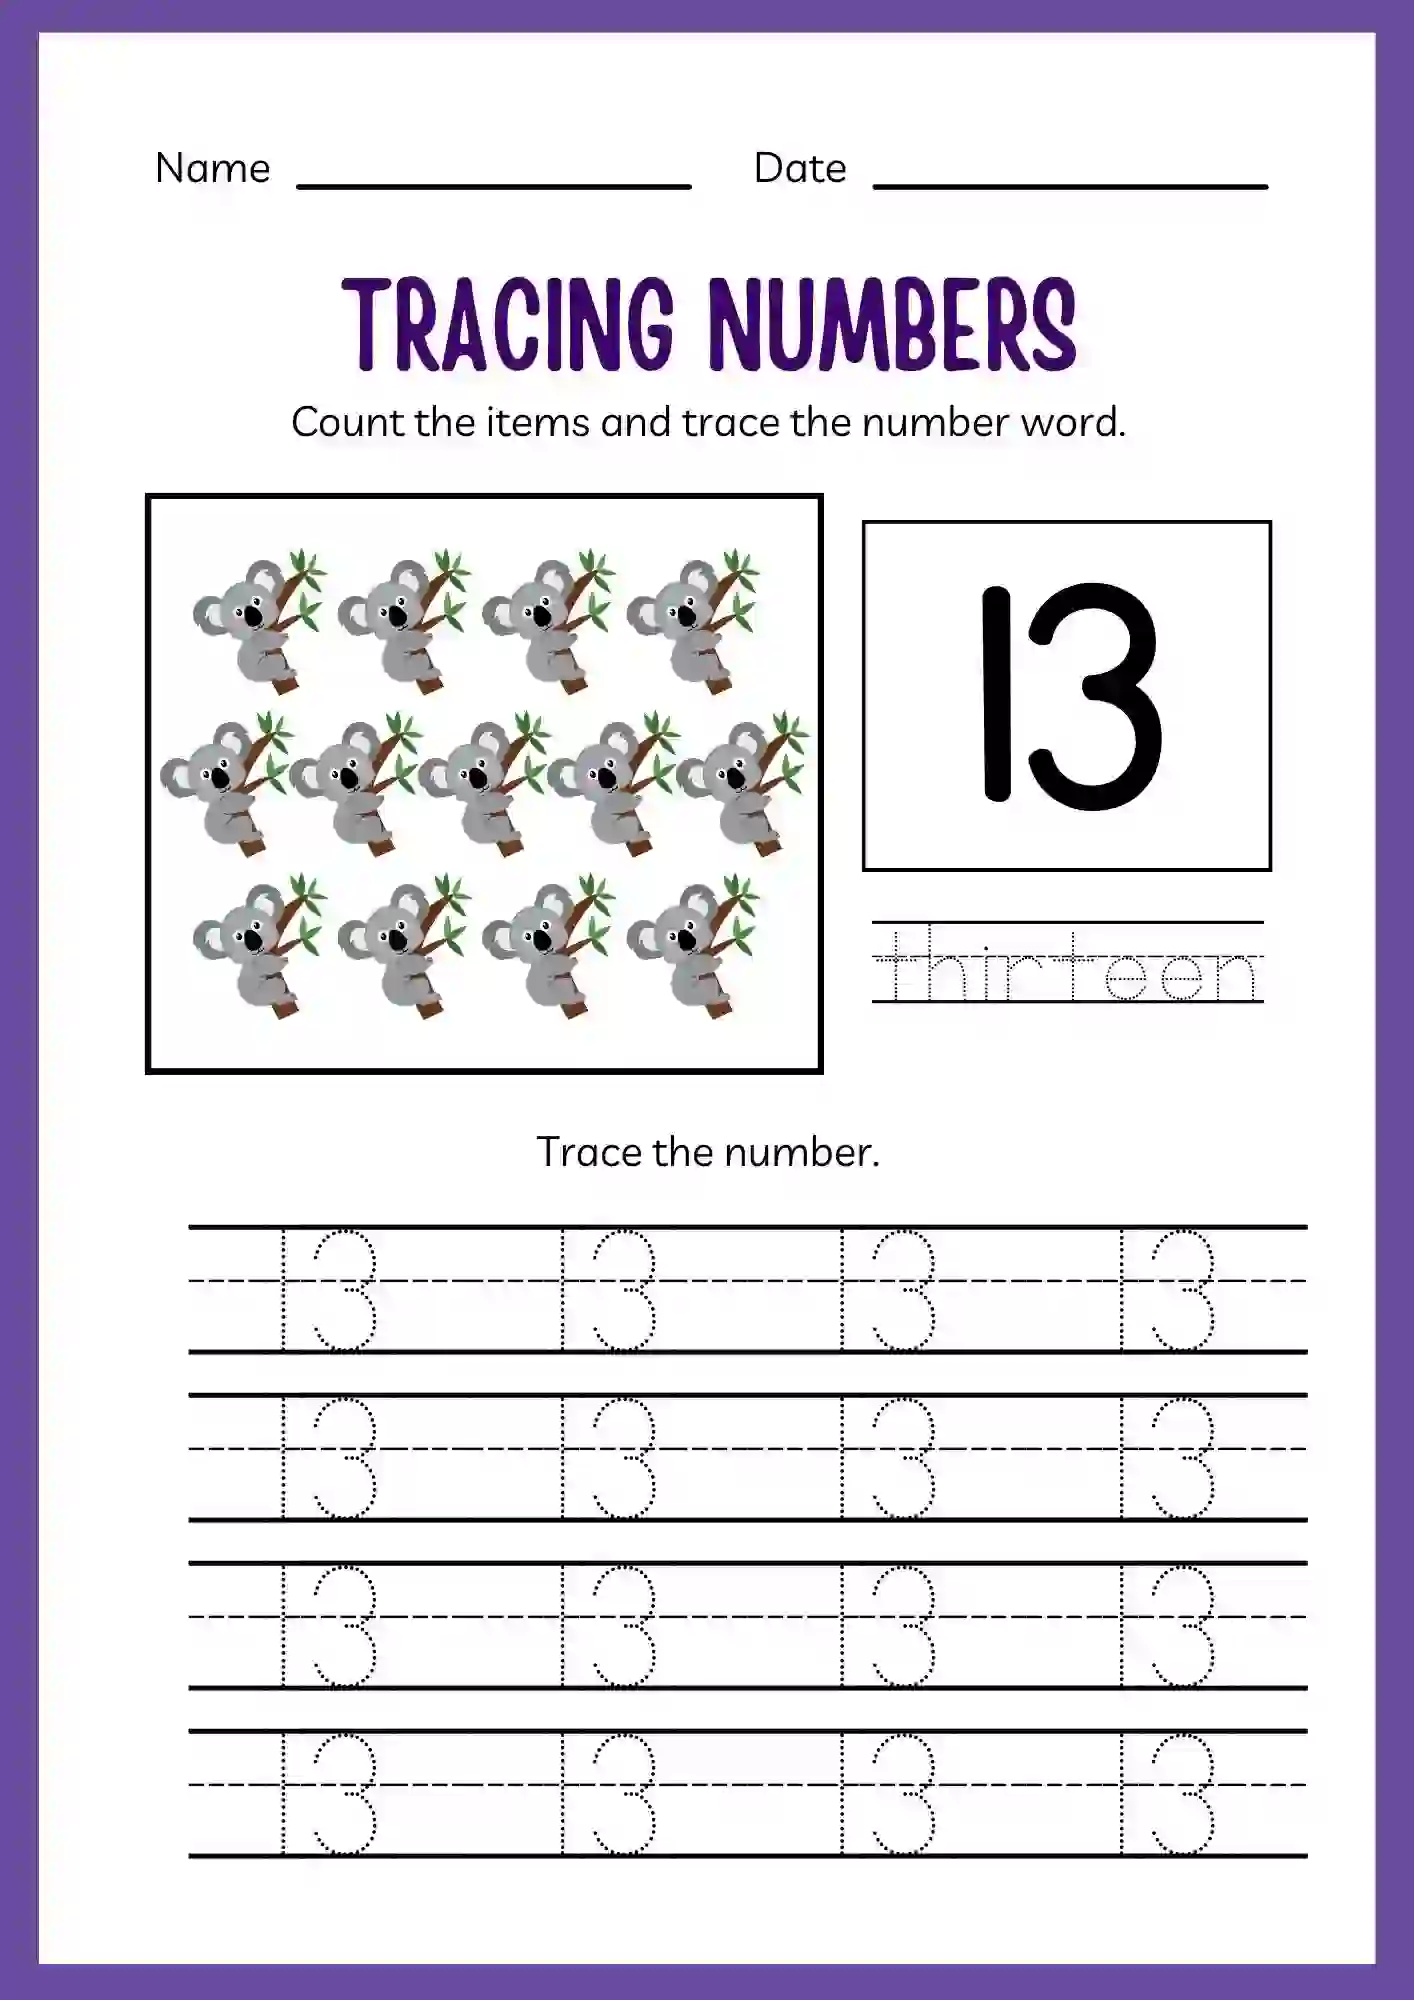 Number Tracing Worksheets 1 to 20 (Number 13 tracing sheet)